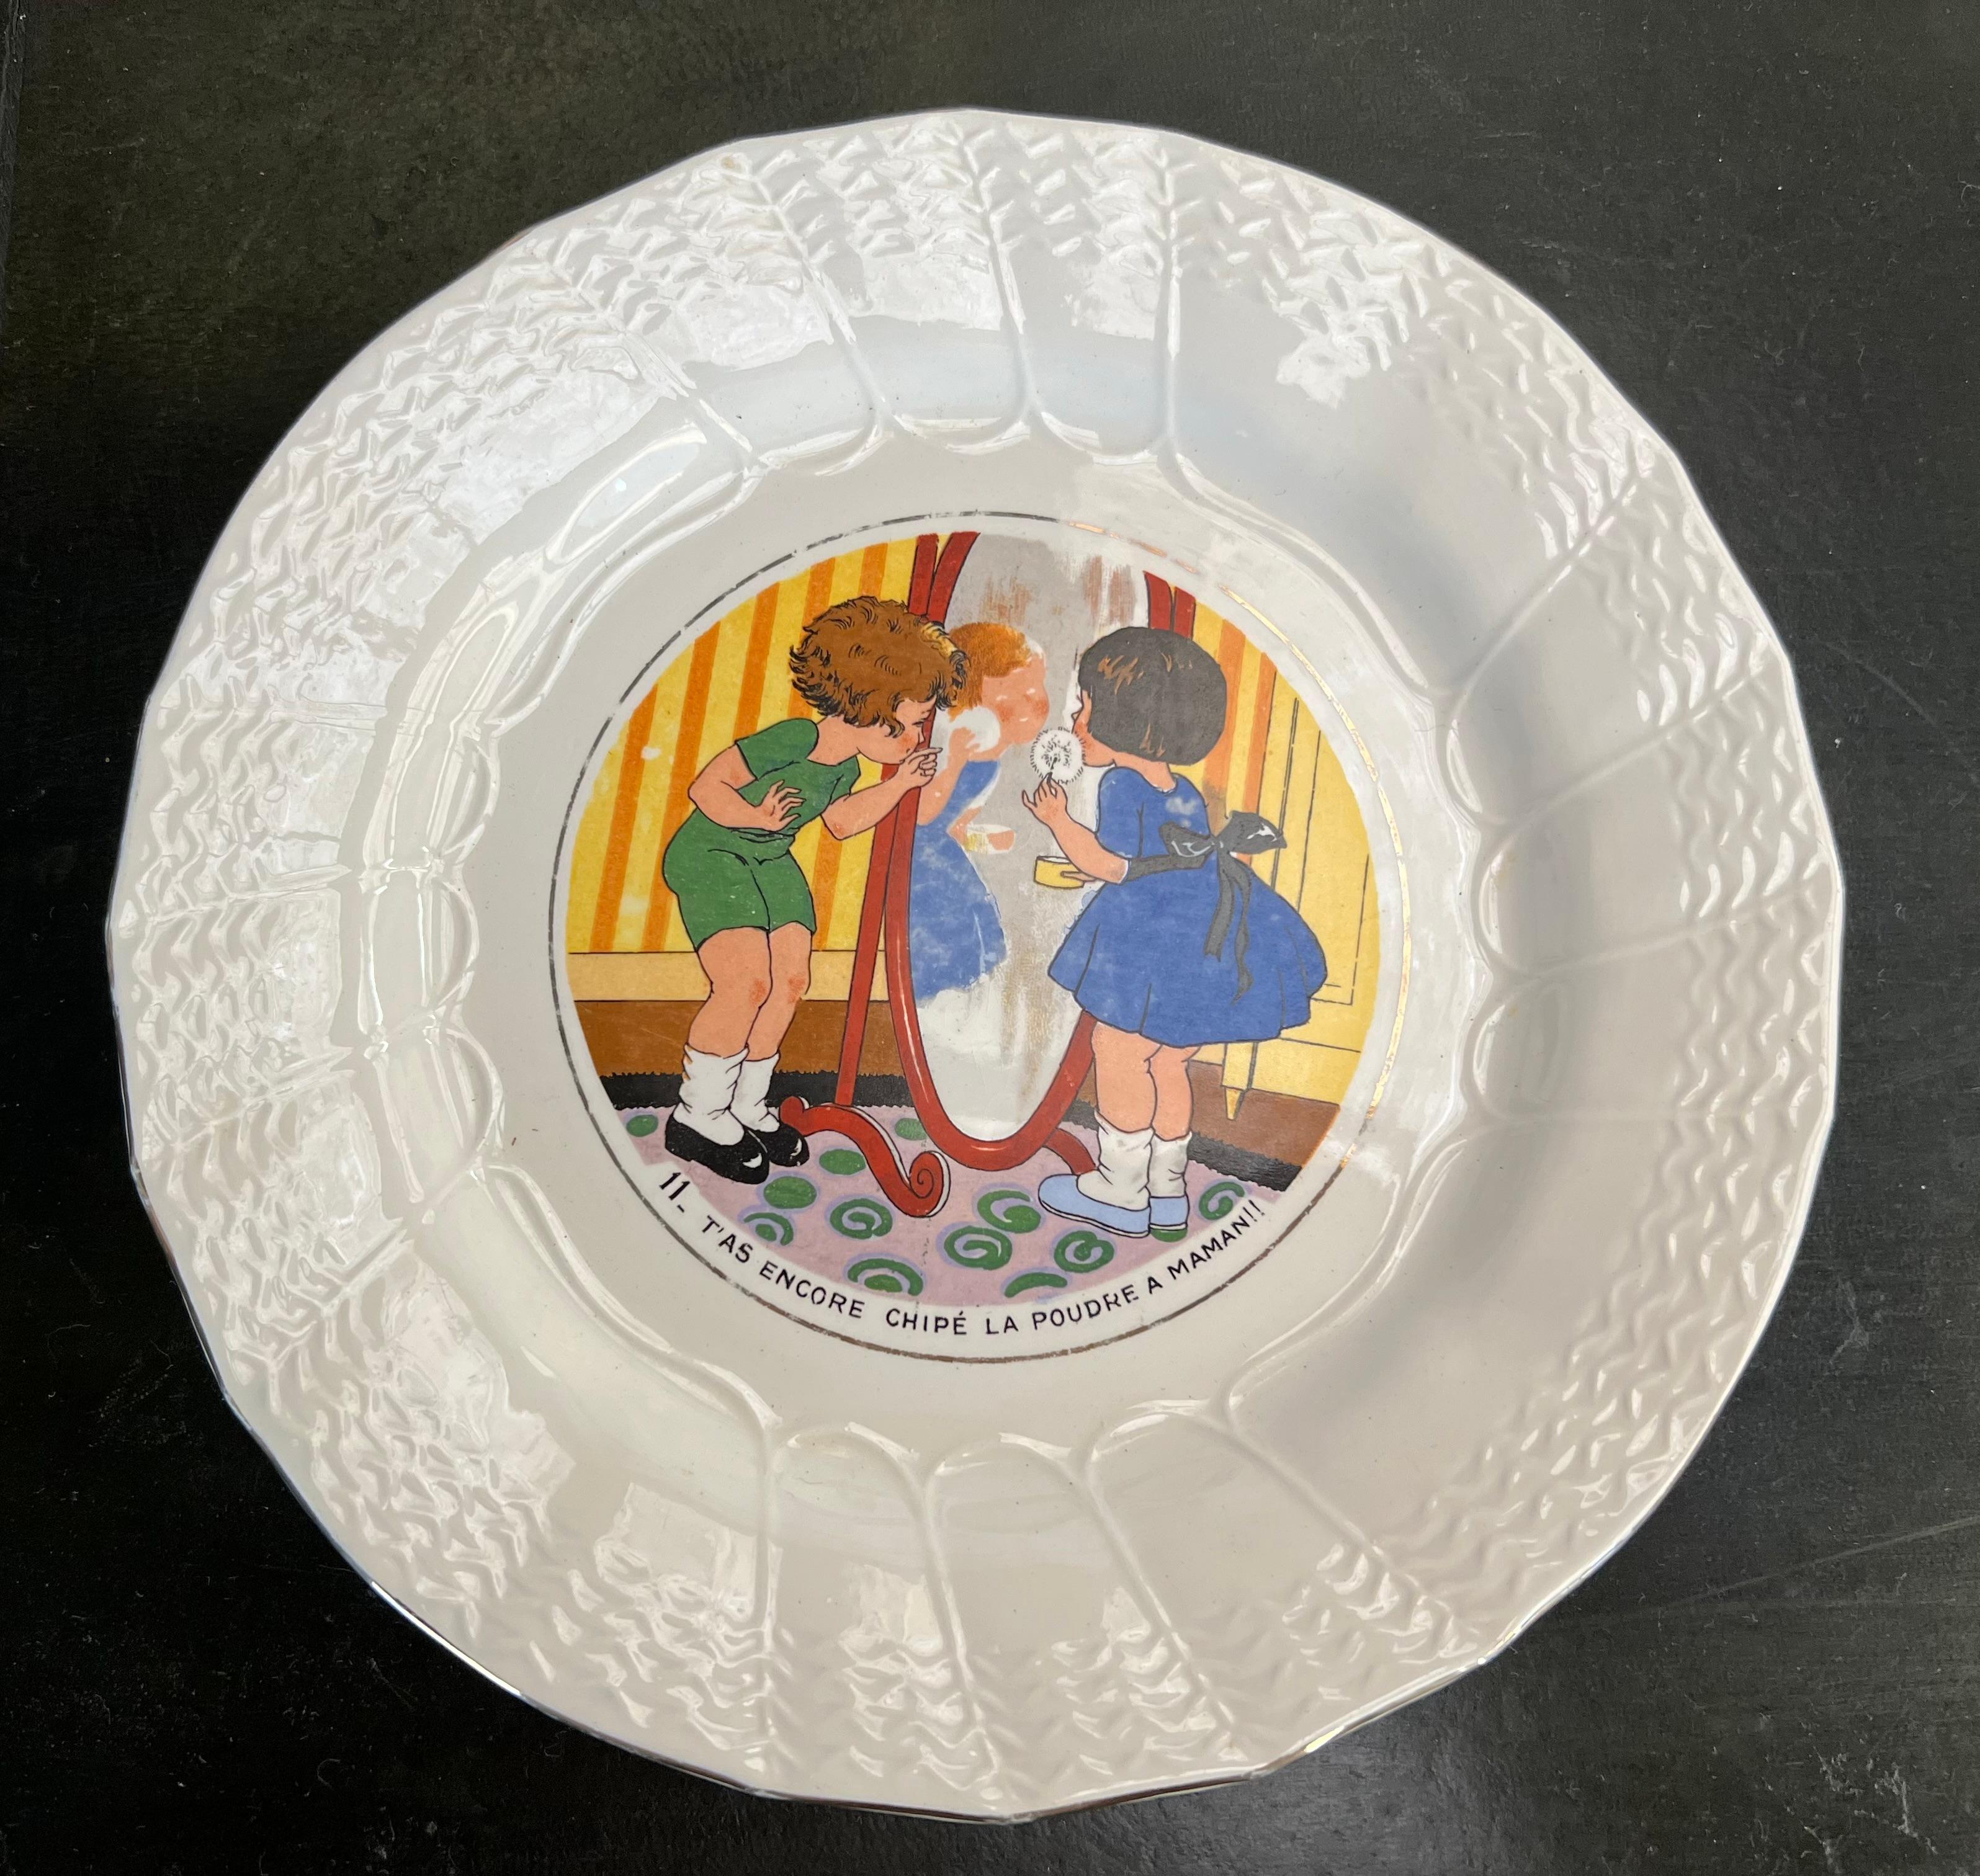 Set of 11 vintage cheese/dessert plates from the Sarreguemines earthenware factory, part of the series inspired by childhood themes. The earthenware is signed Sarreguemines with a raised contour and features the Bicot design. The plates have a